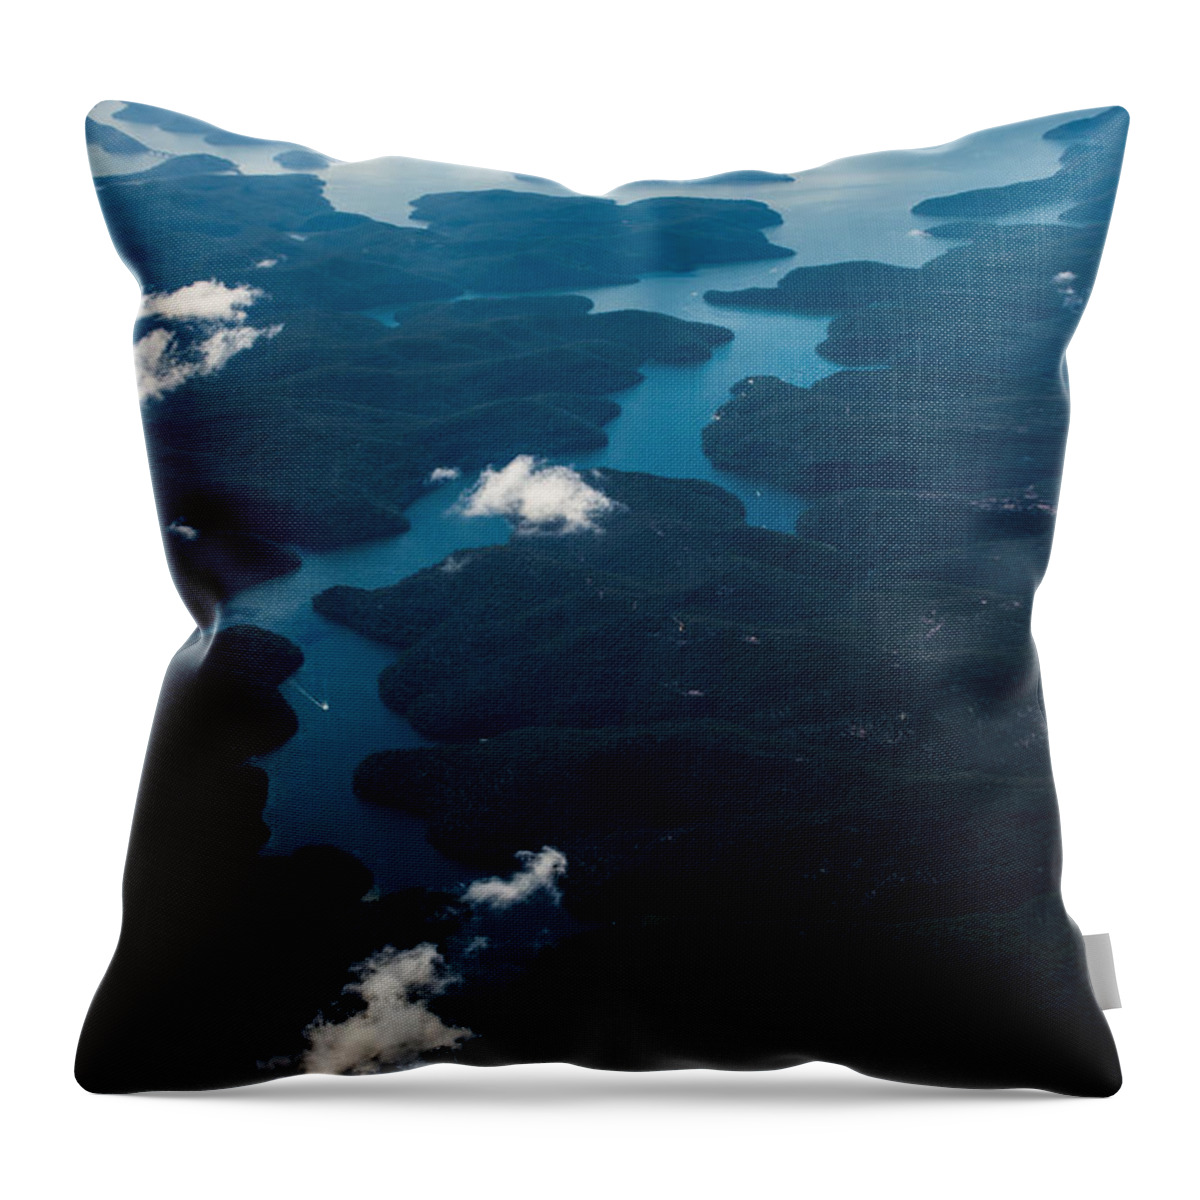 Sydney Throw Pillow featuring the photograph River From The Sky by Parker Cunningham